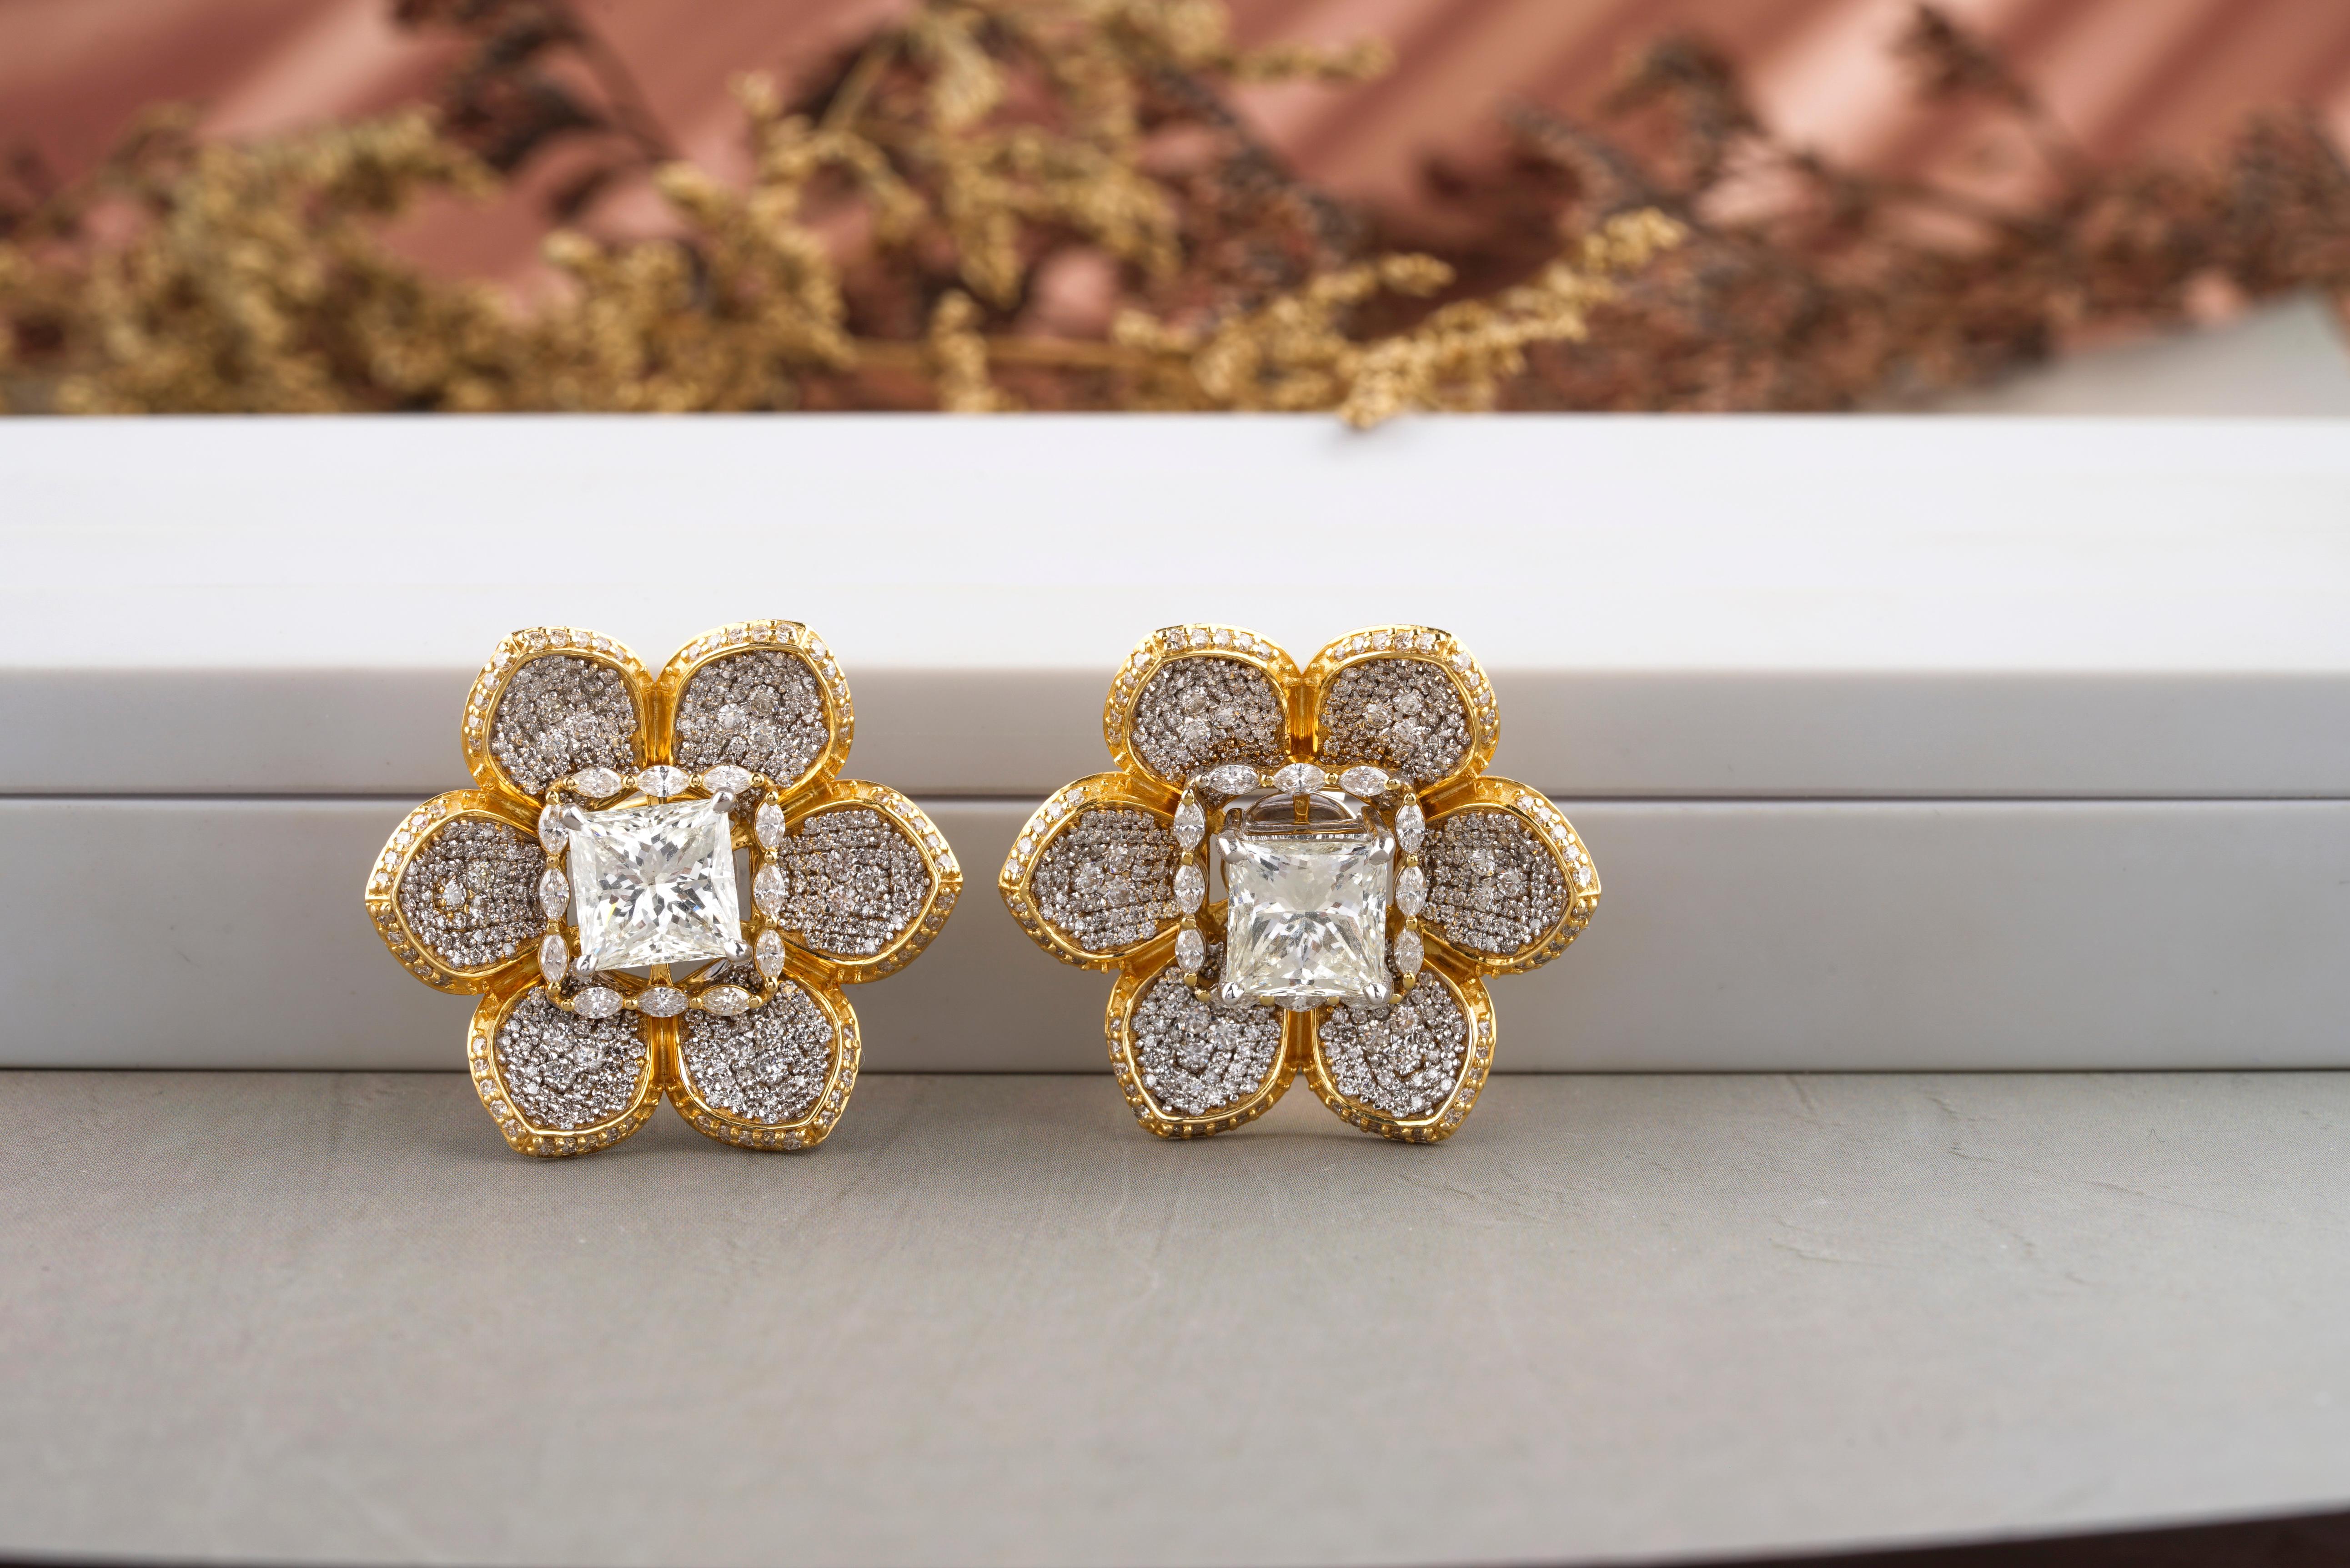 These earrings feature a princess-cut diamond in a simple and elegant solitaire setting made from 18K solid gold, surrounded by a delicate floral design jacket, which is designed to accentuate the simple solitaire, adding an extra element of